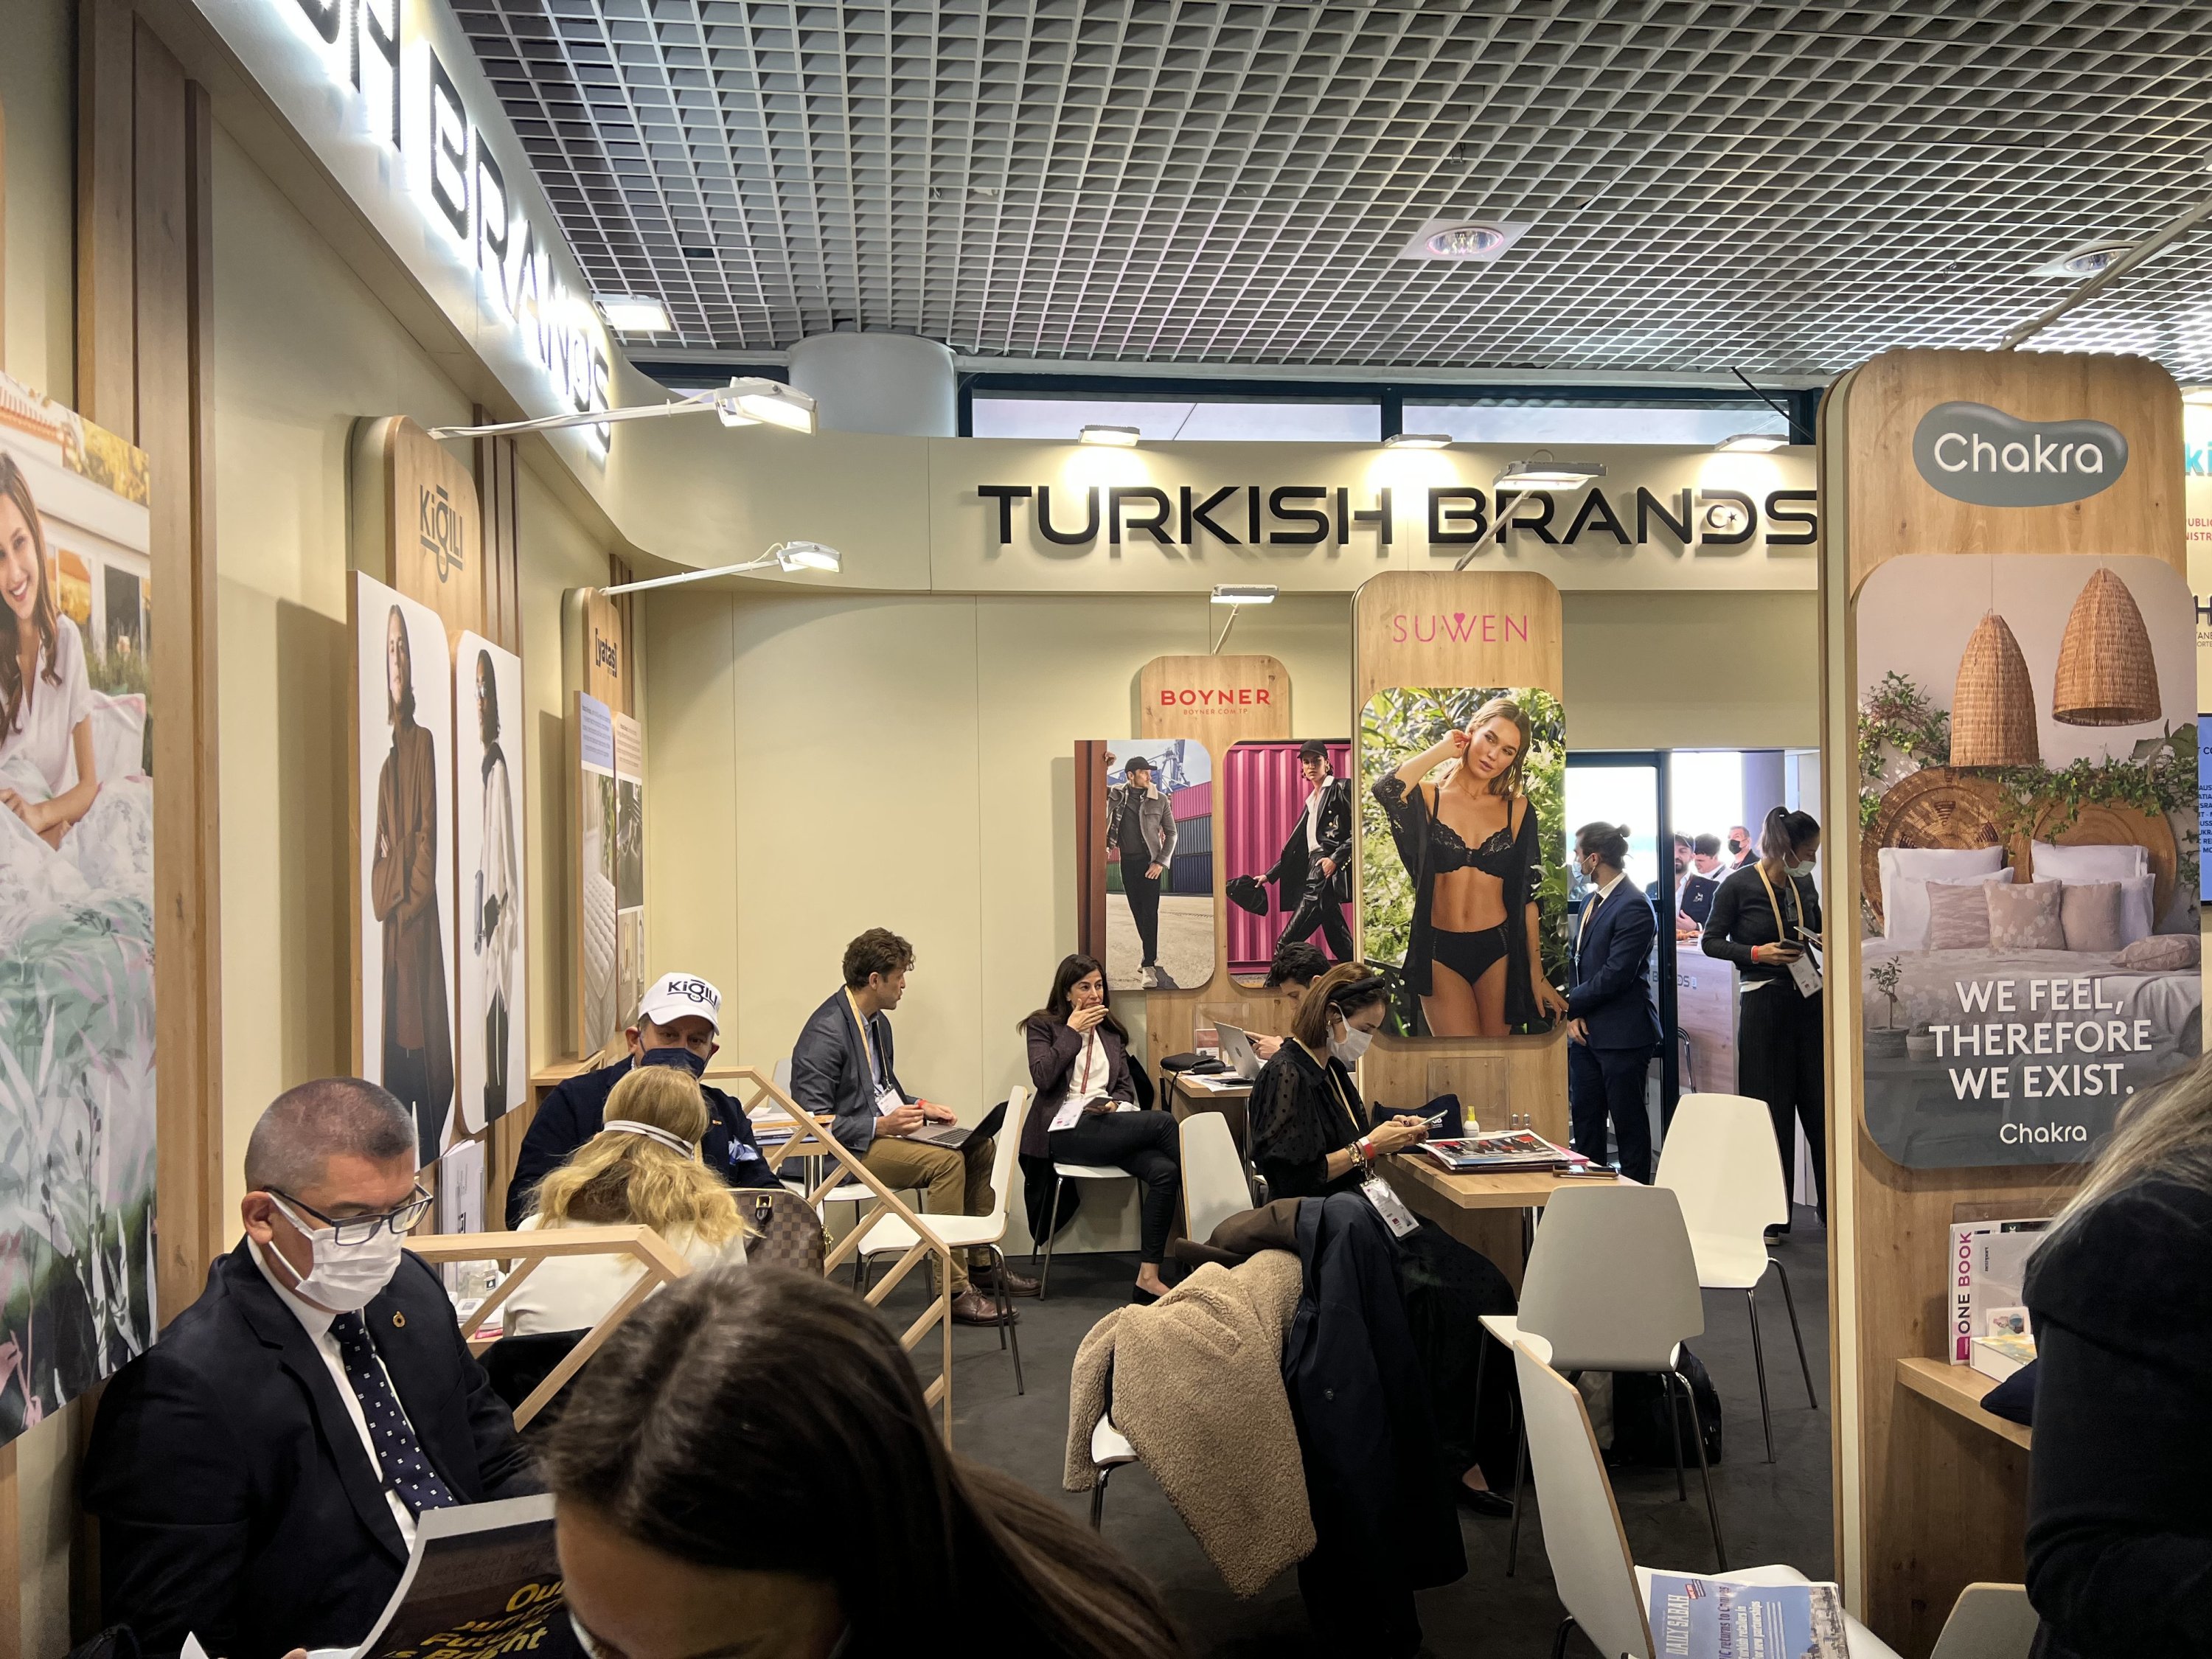 Visitors and representatives of Turkish retail companies are seen at the Turkish Brands booth during the MAPIC fair, Cannes, France, Nov. 30, 2021.